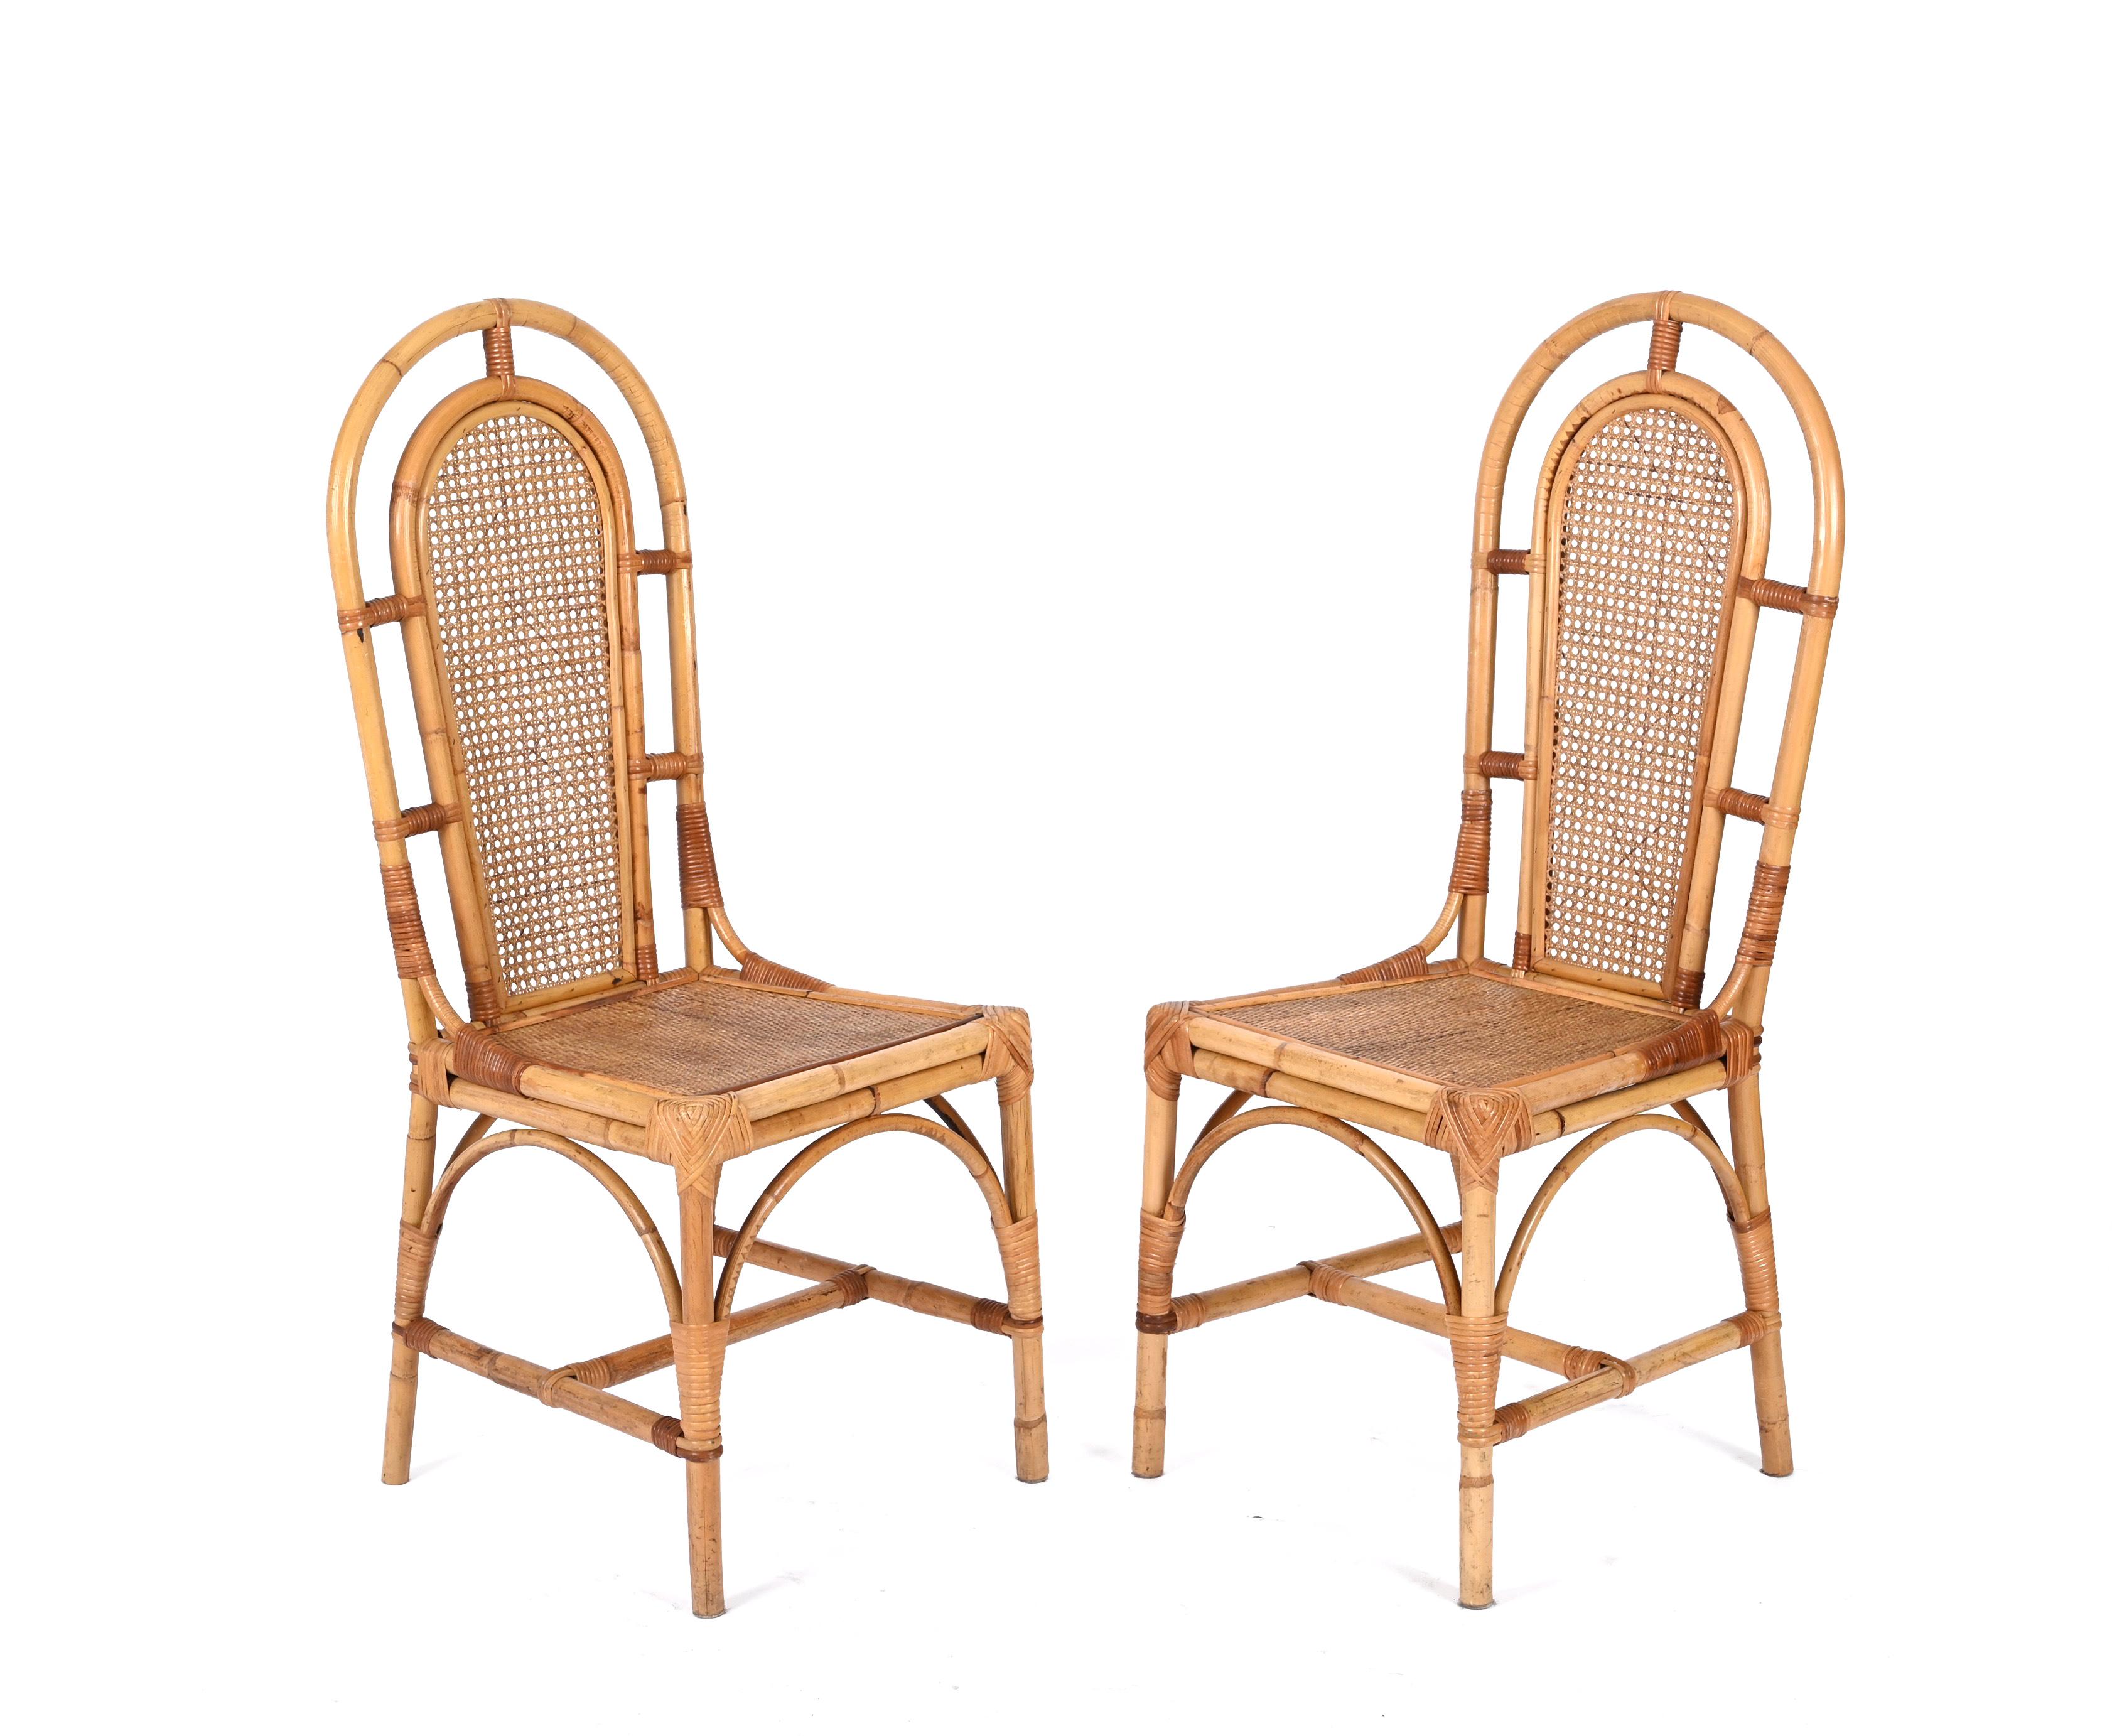 Sef of Four Bamboo and Vienna Straw Chairs, Vivai Del Sud, Italy 1970s For Sale 5